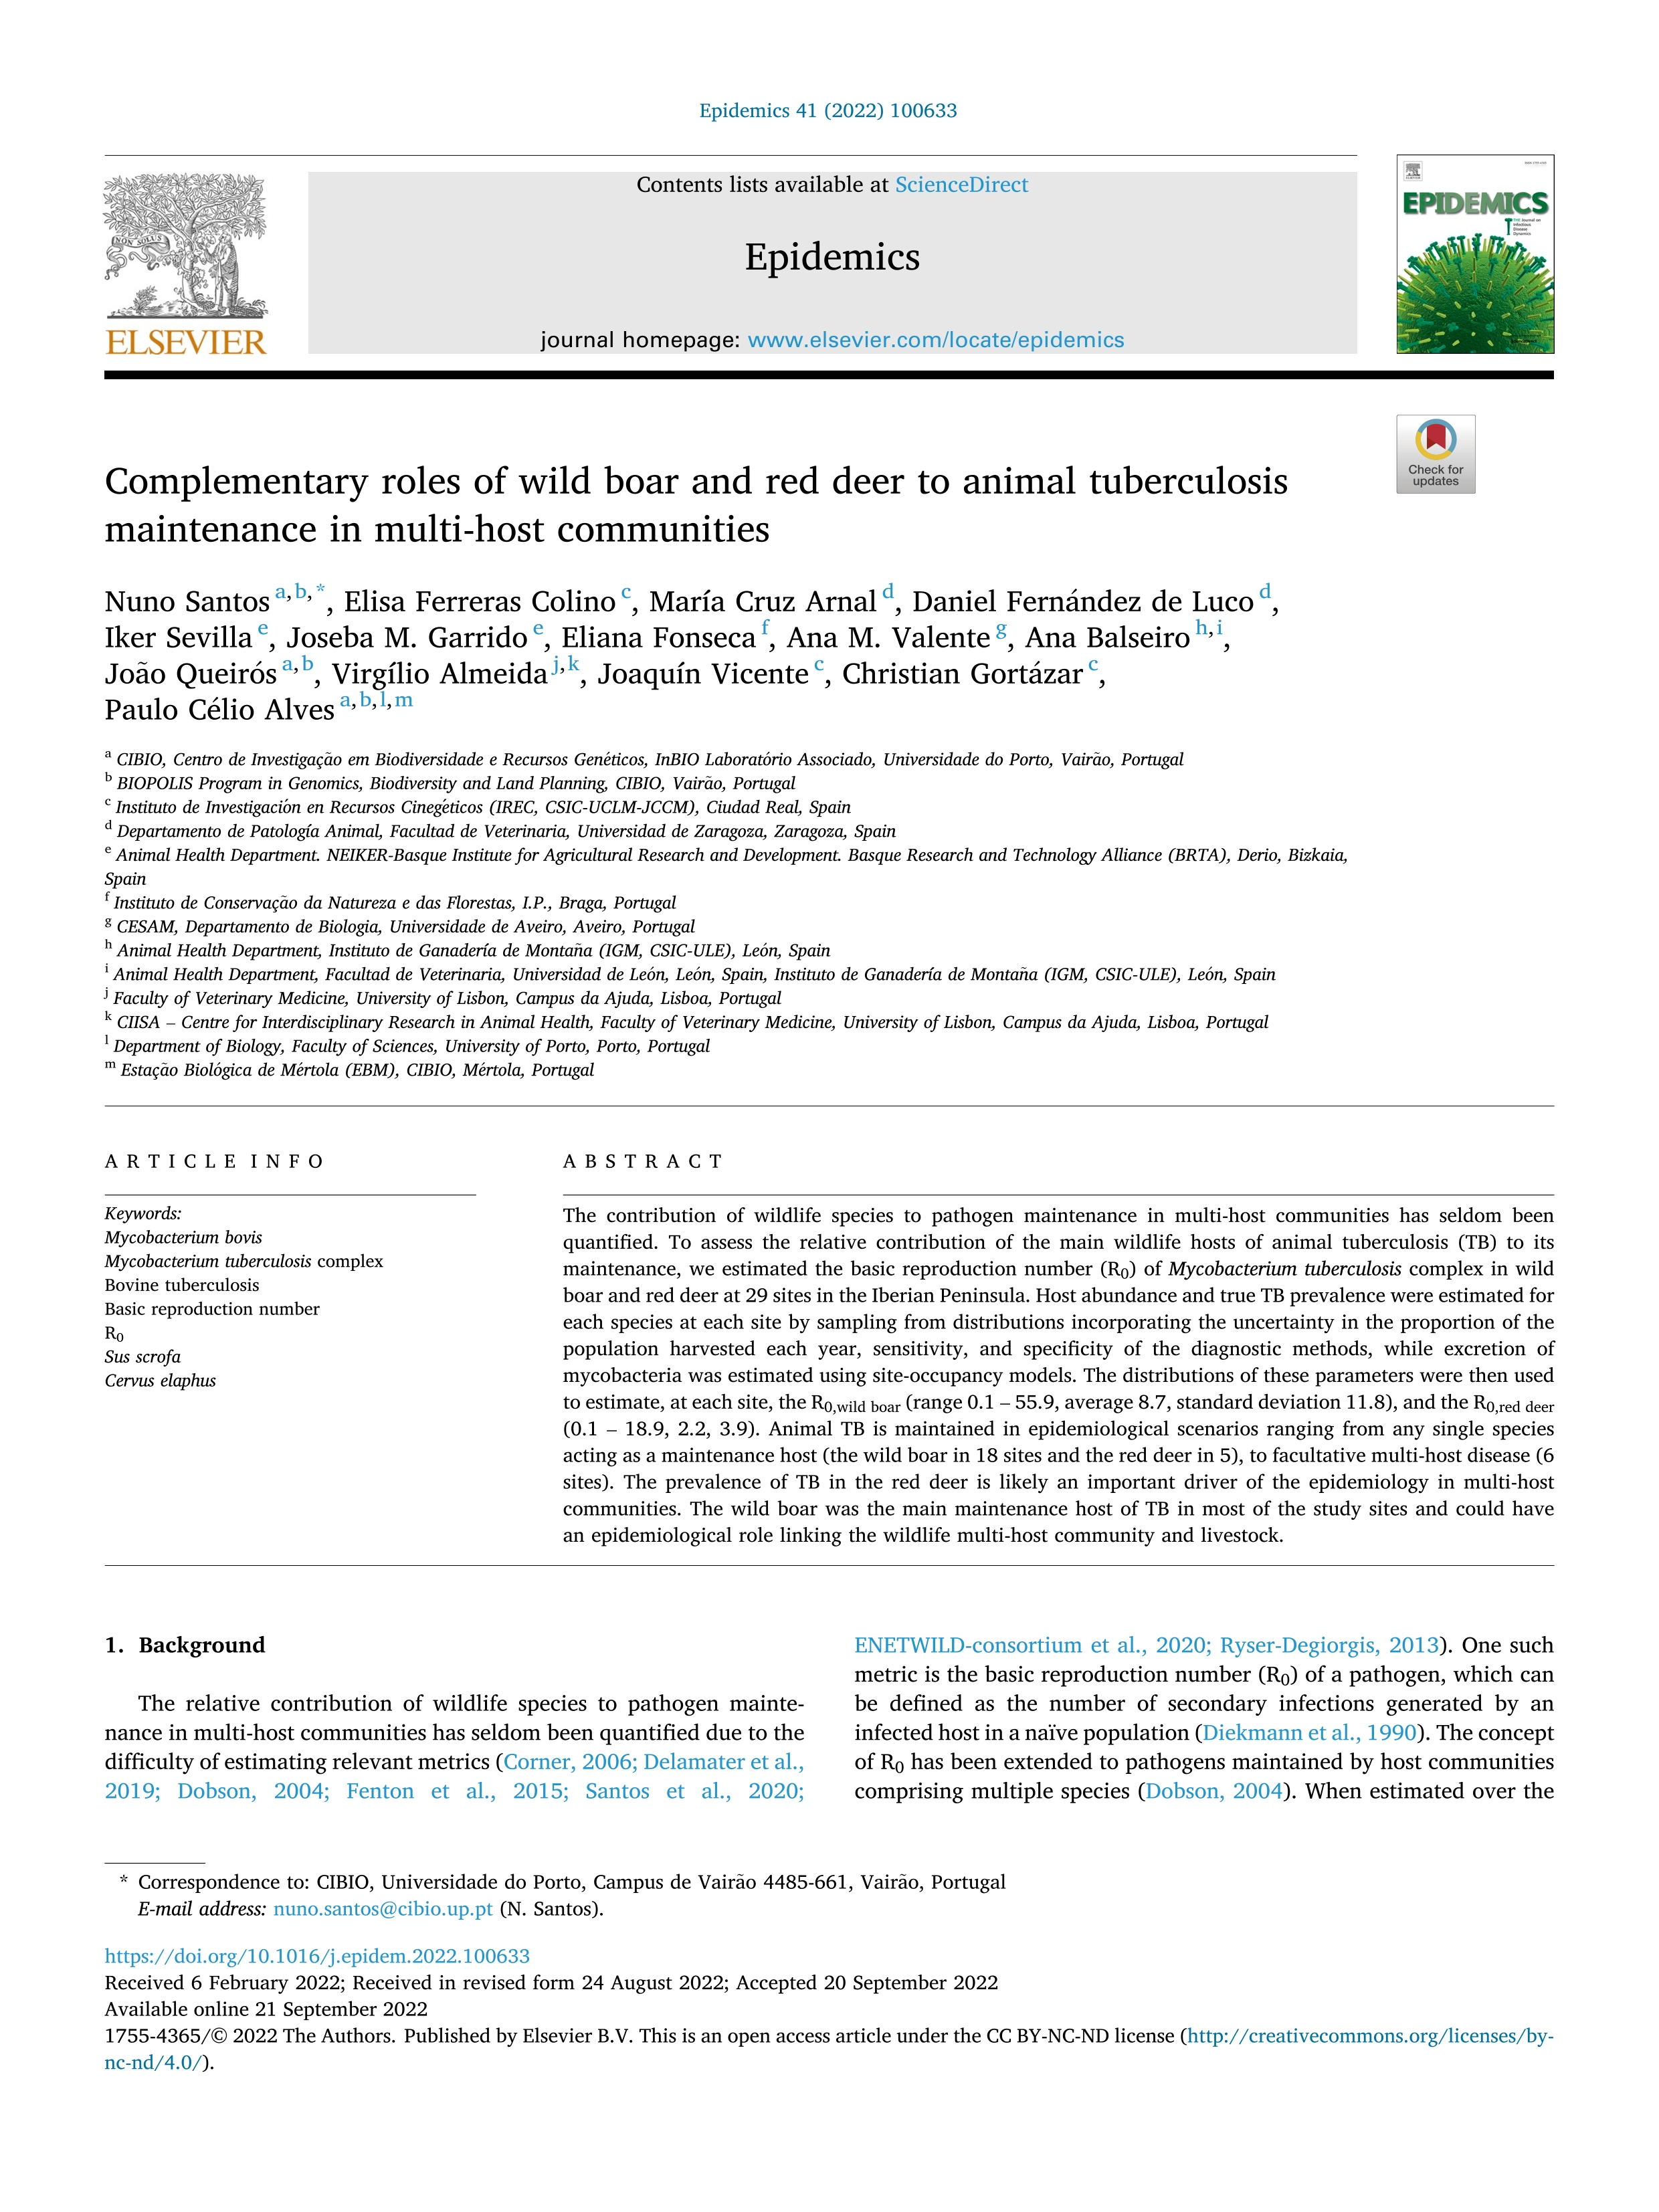 Complementary roles of wild boar and red deer to animal tuberculosis maintenance in multi-host communities